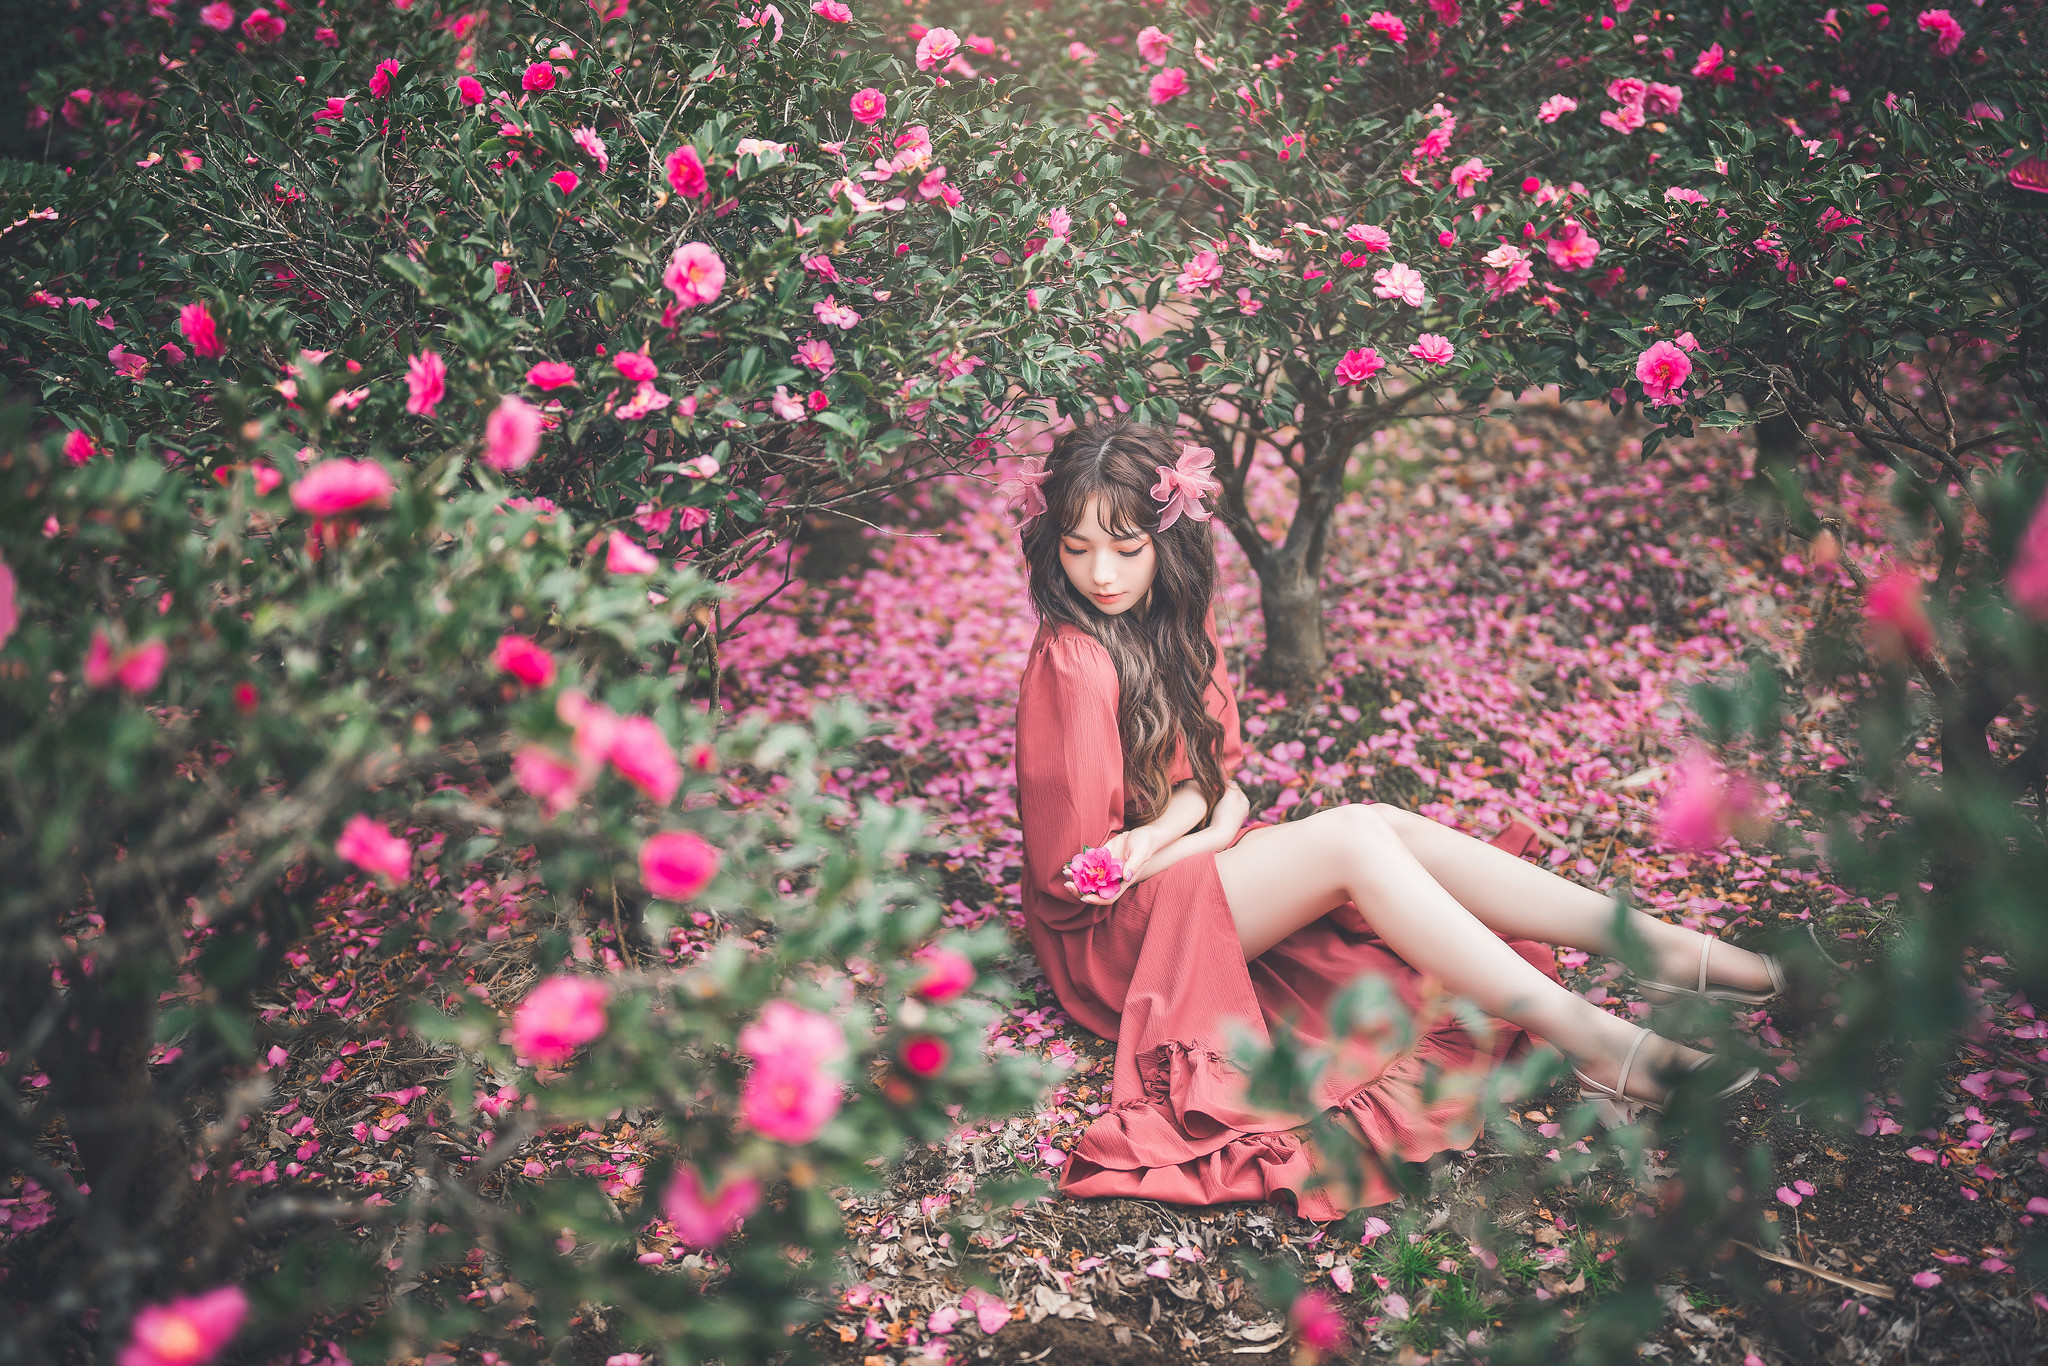 Asian Women Model Women Outdoors Outdoors Sitting Red Clothing Flowers Plants 2048x1366